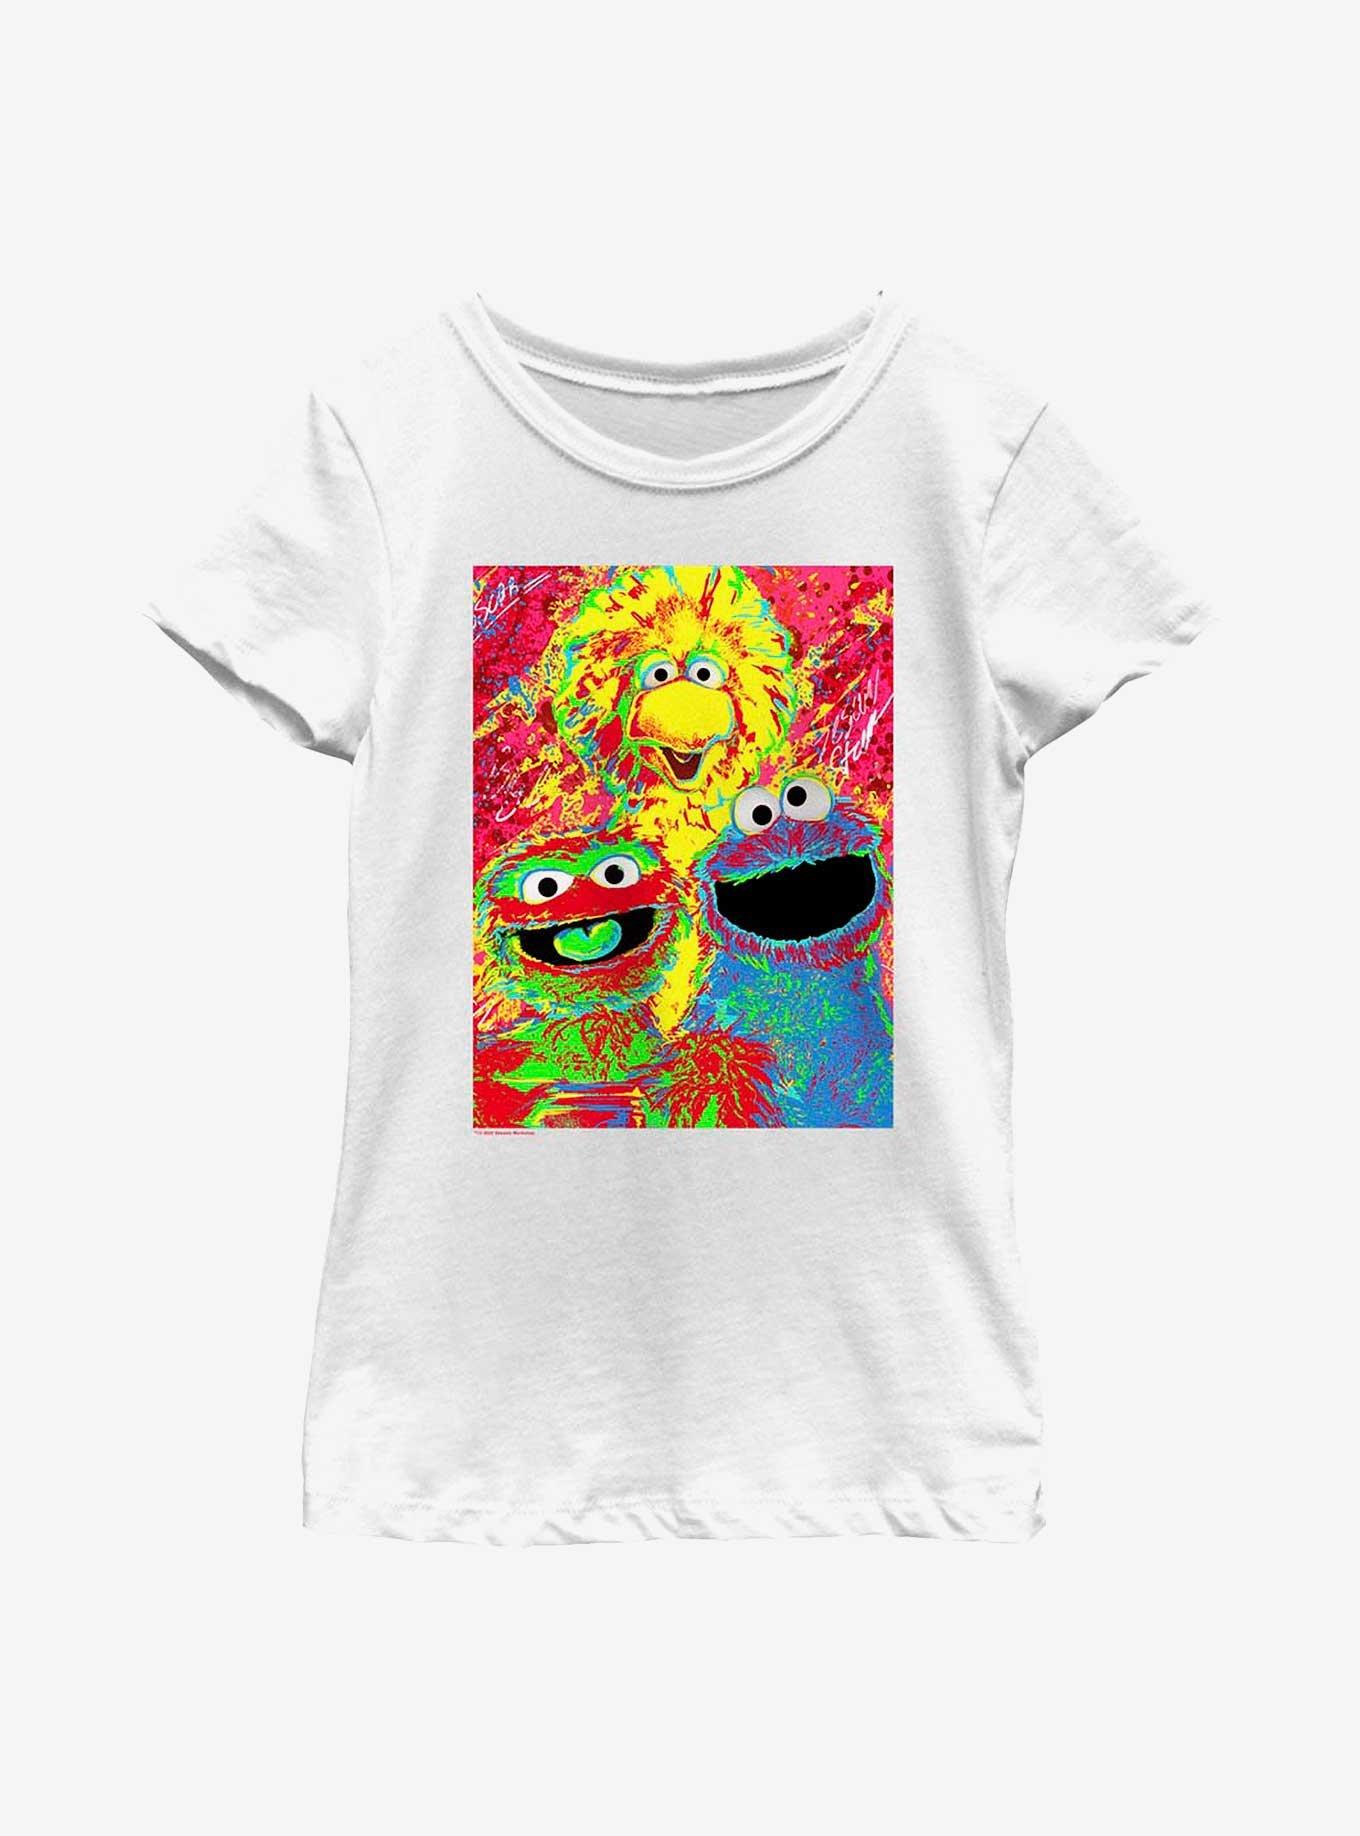 Sesame Street Big Bird, Oscar, and Cookie Monster Poster Youth Girls T-Shirt, WHITE, hi-res